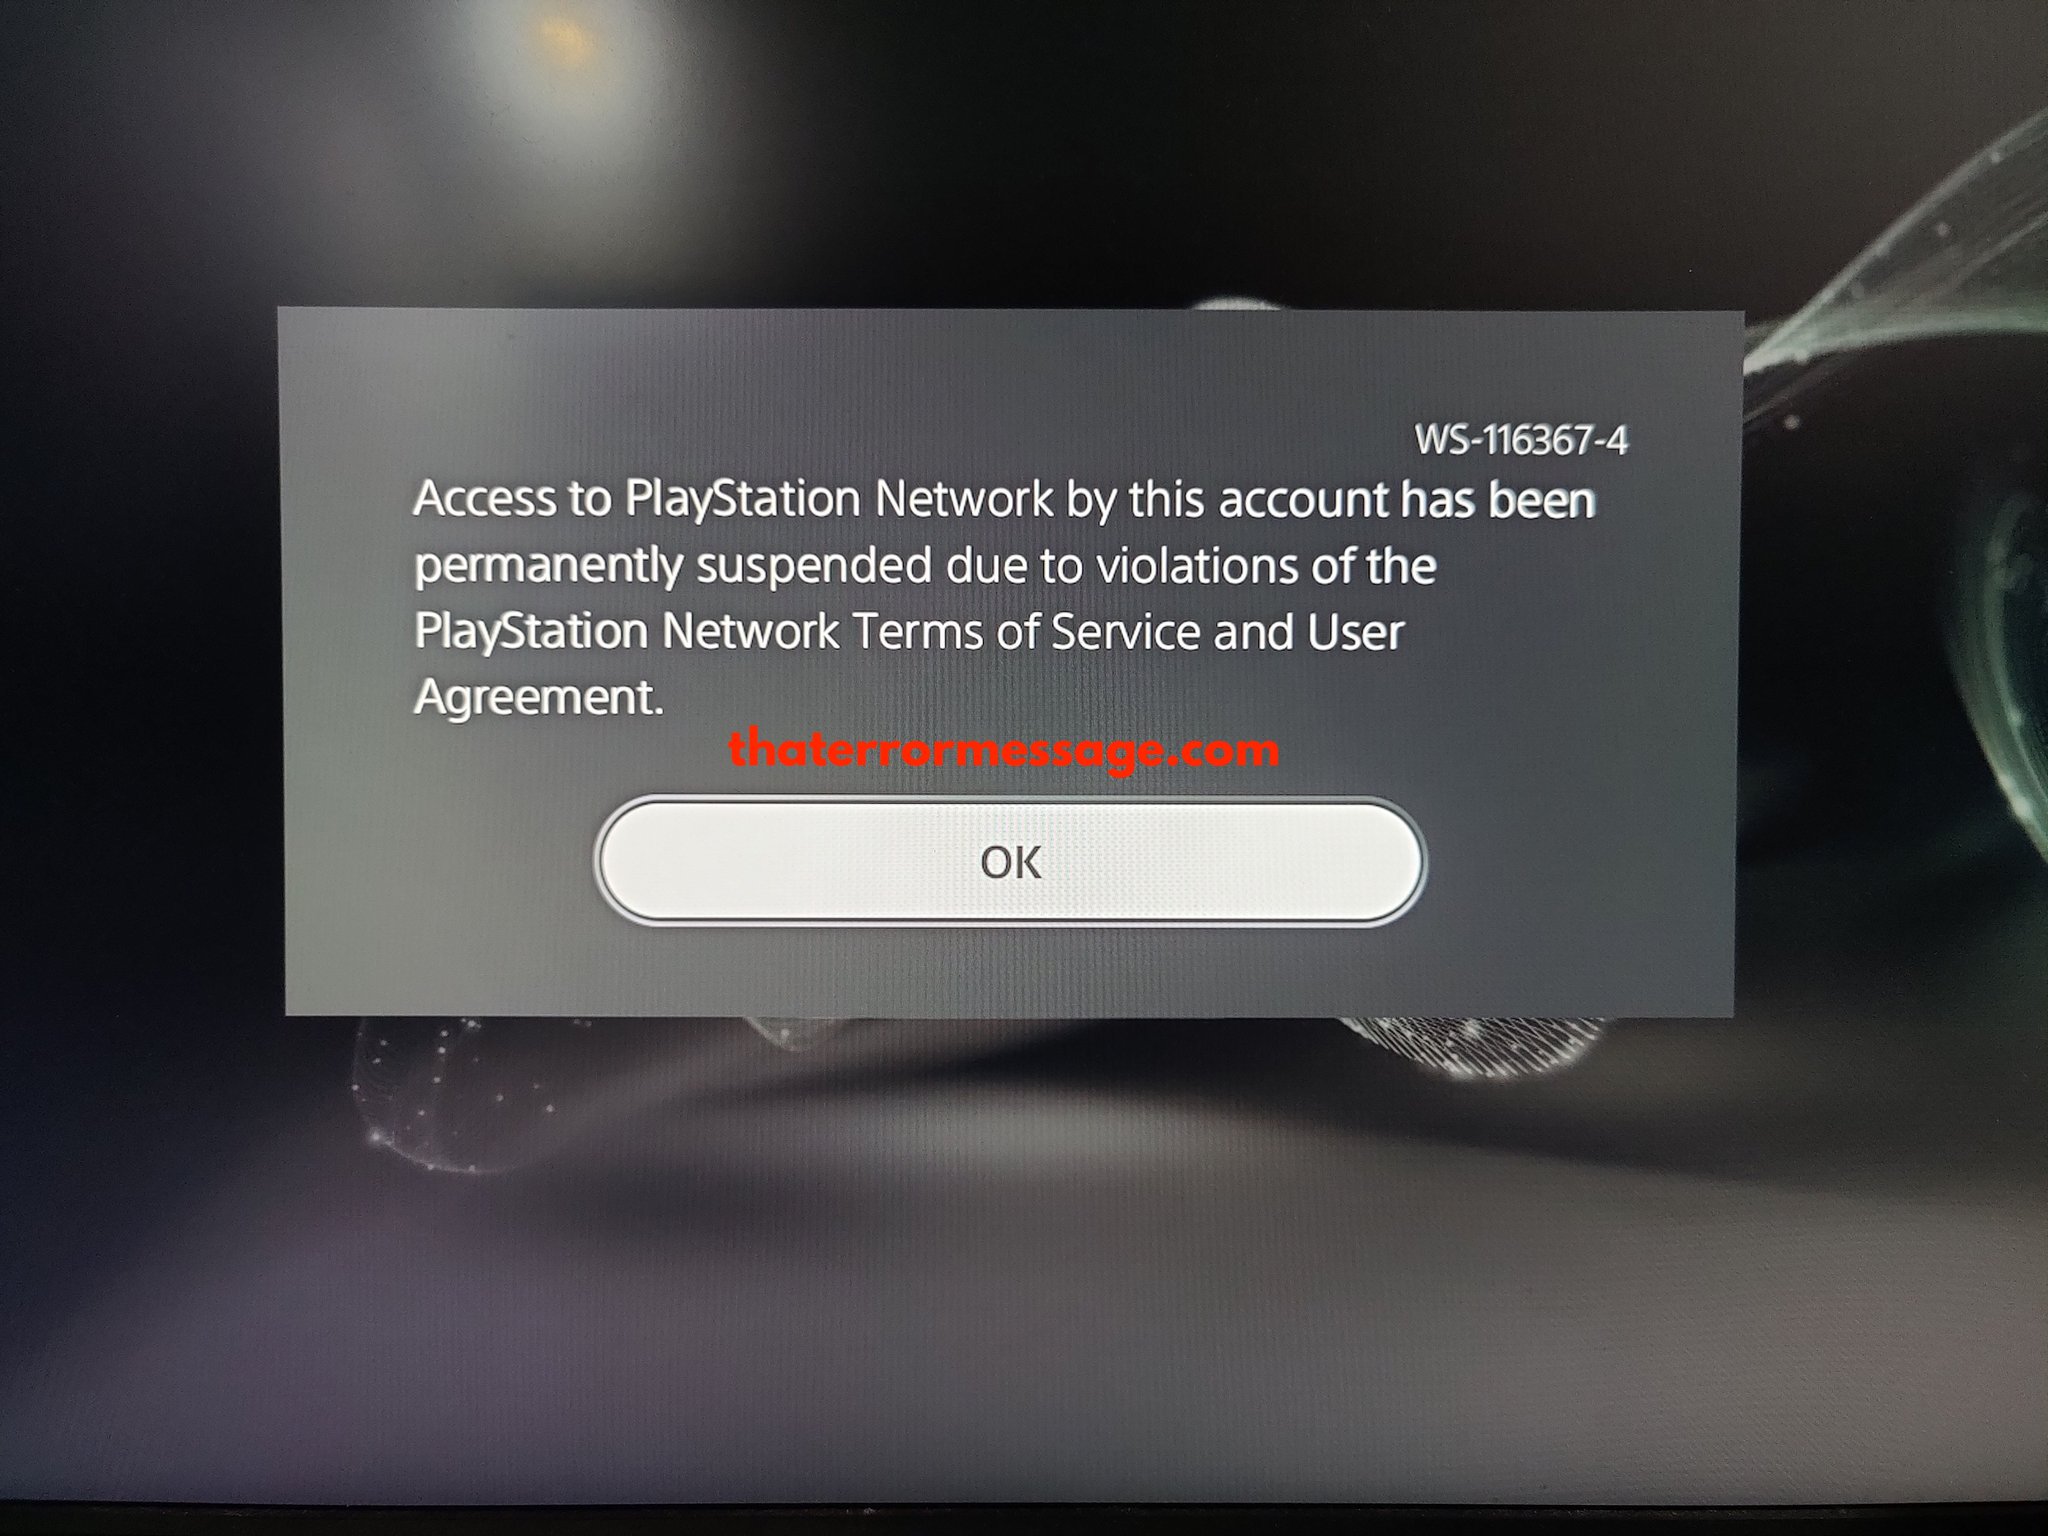 Access To Playstation Network By This Account Has Been Suspended Ws 116367 4